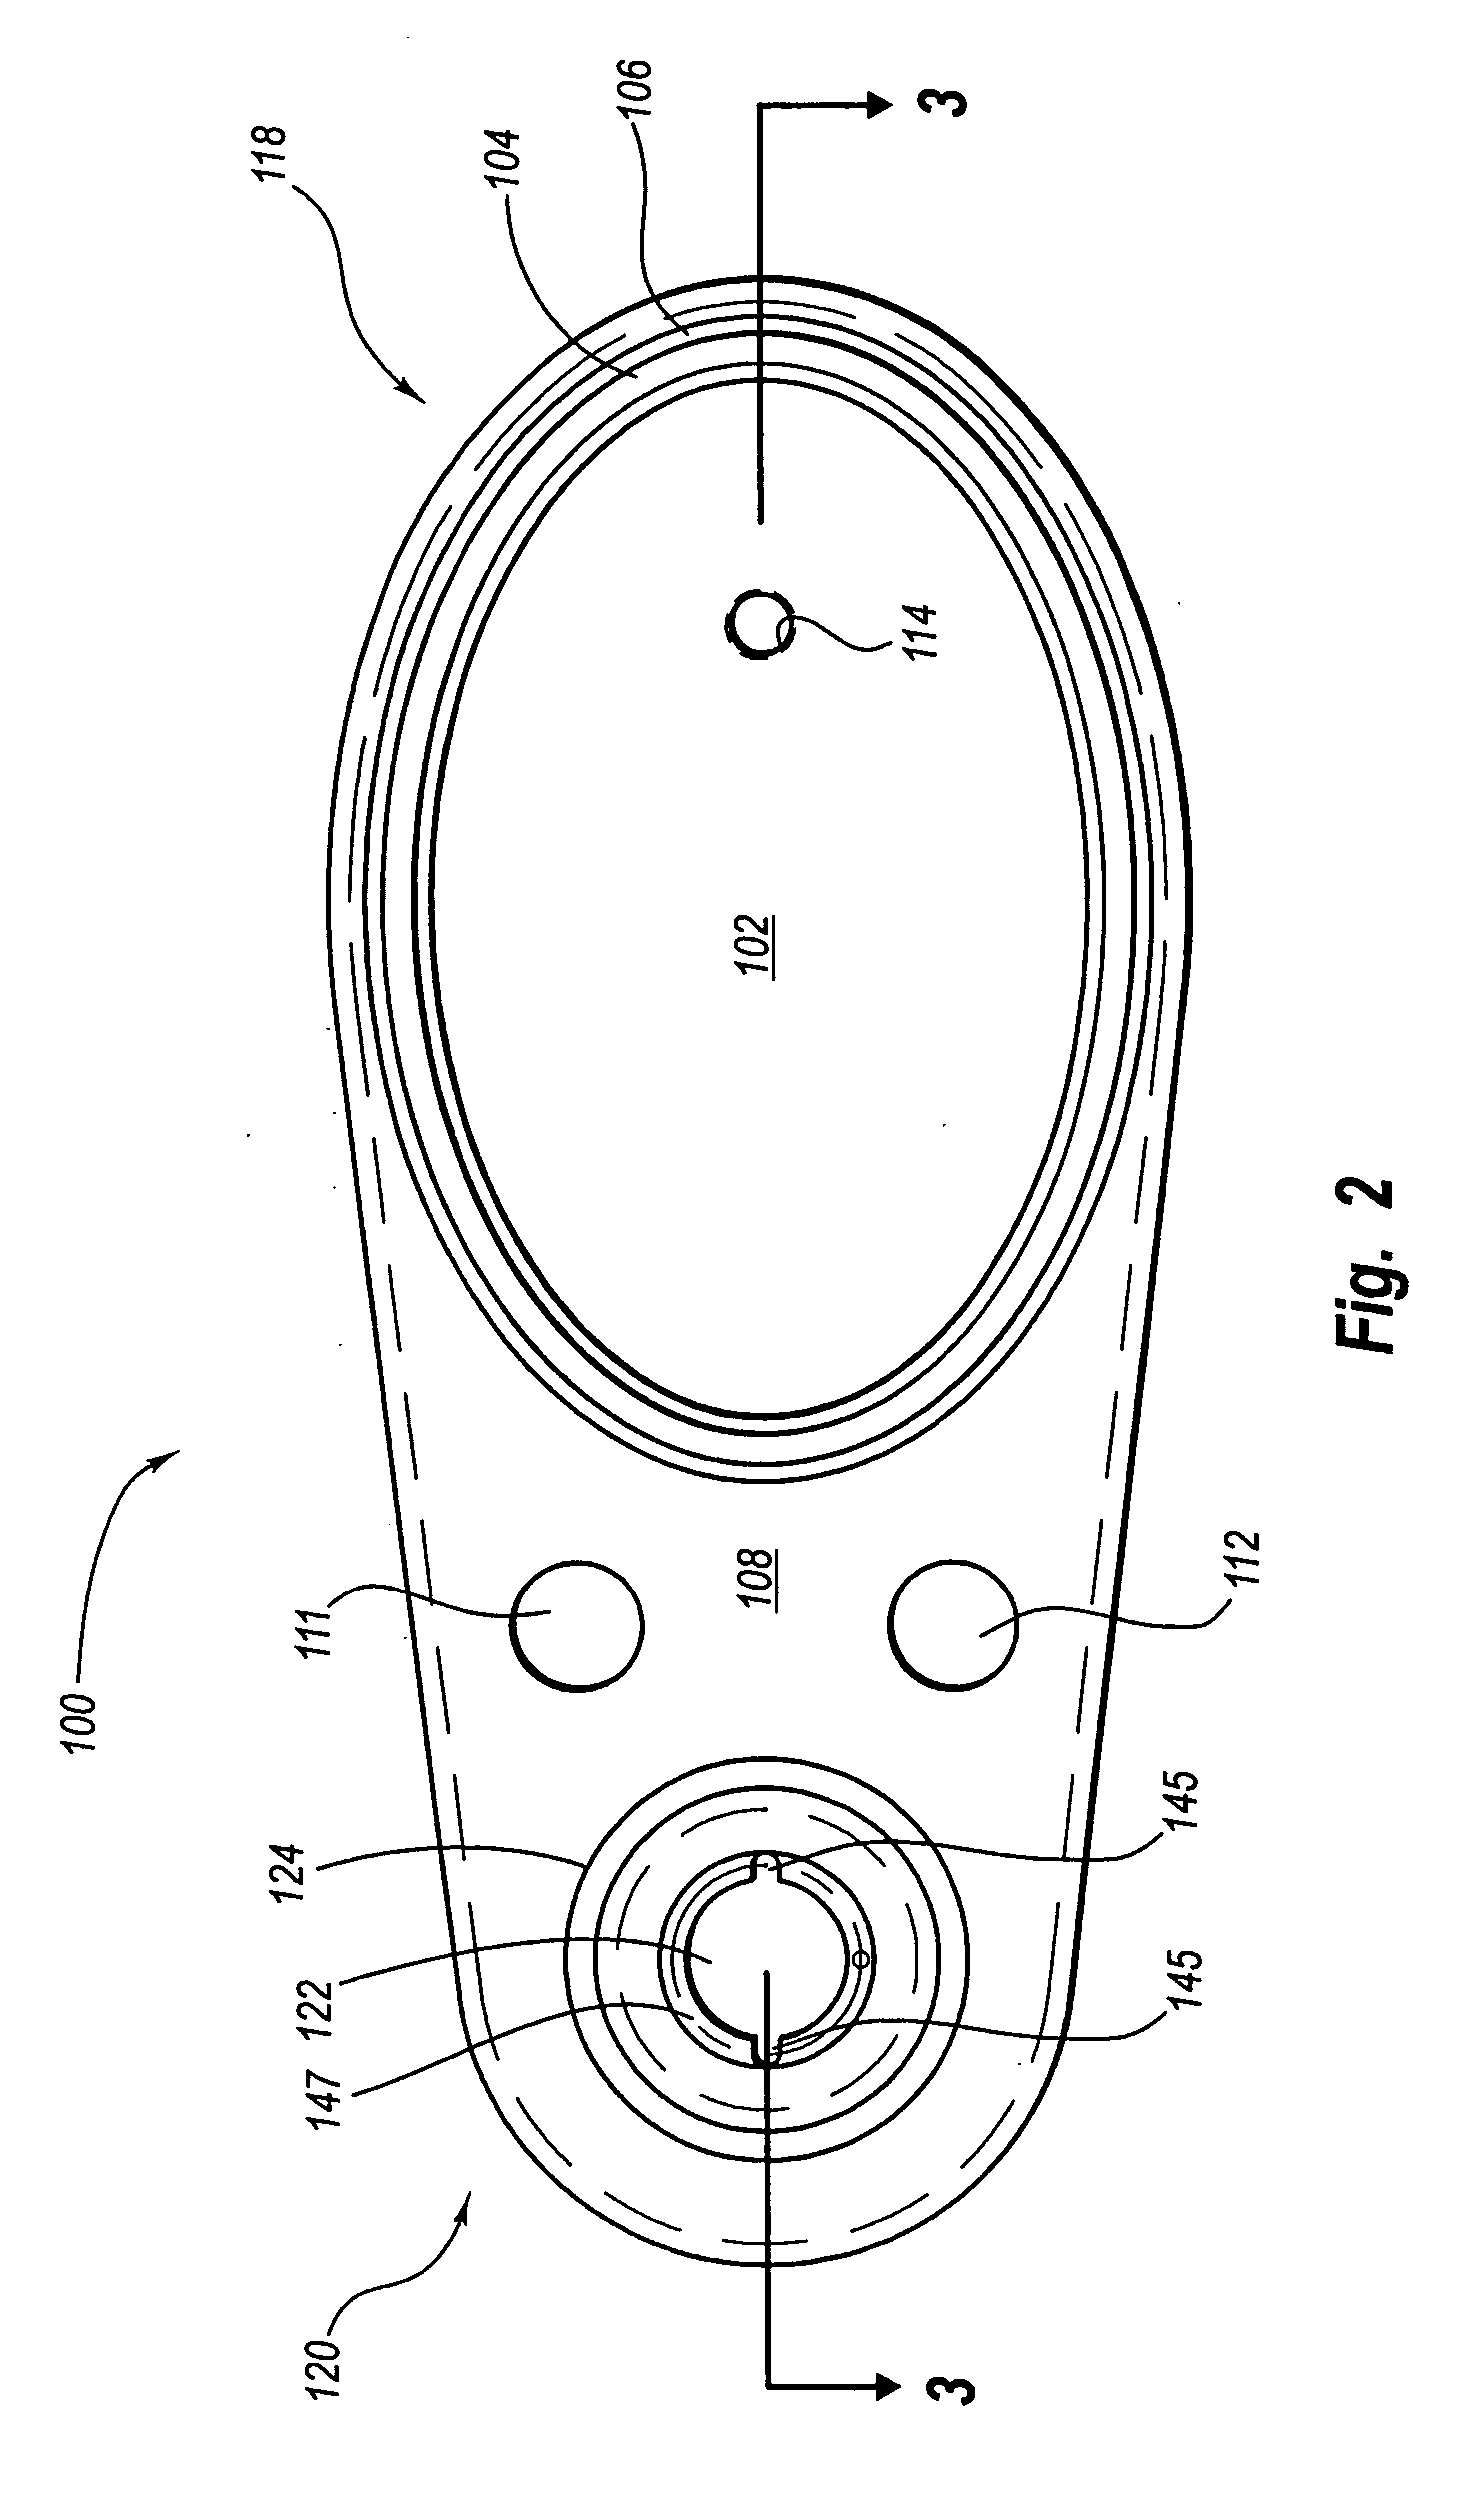 Contoured surface defueling fitting